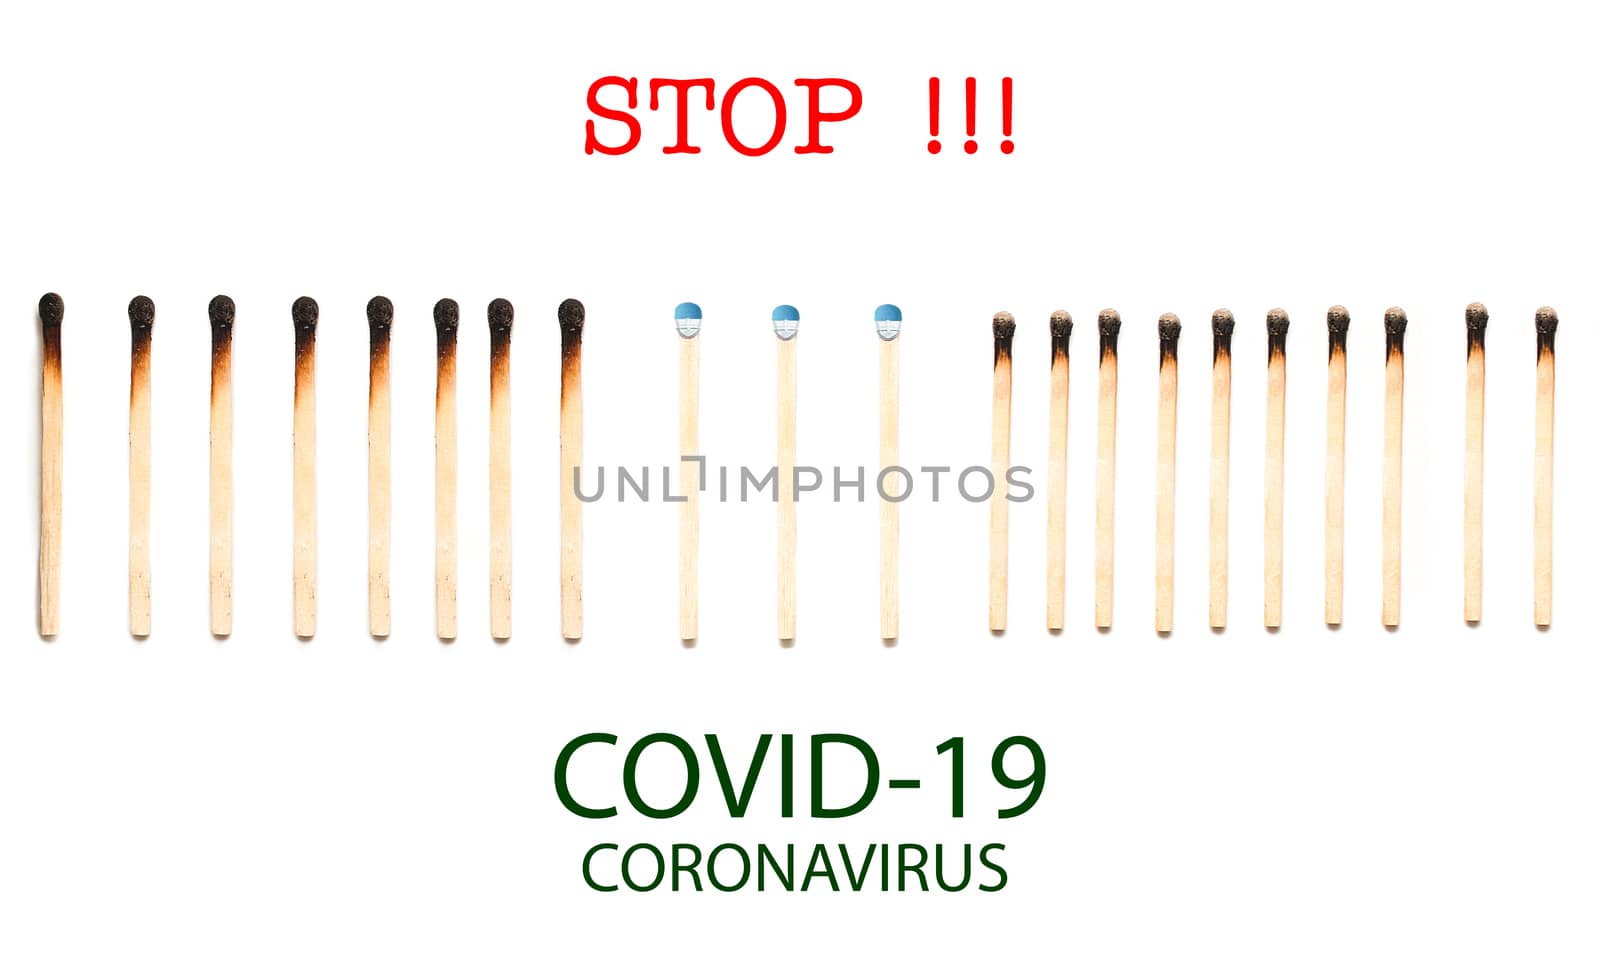 Social distance concept for epidemic safety. Covid-19 and Coronavirus. Keep the distance to avoid contagion. Health oncept